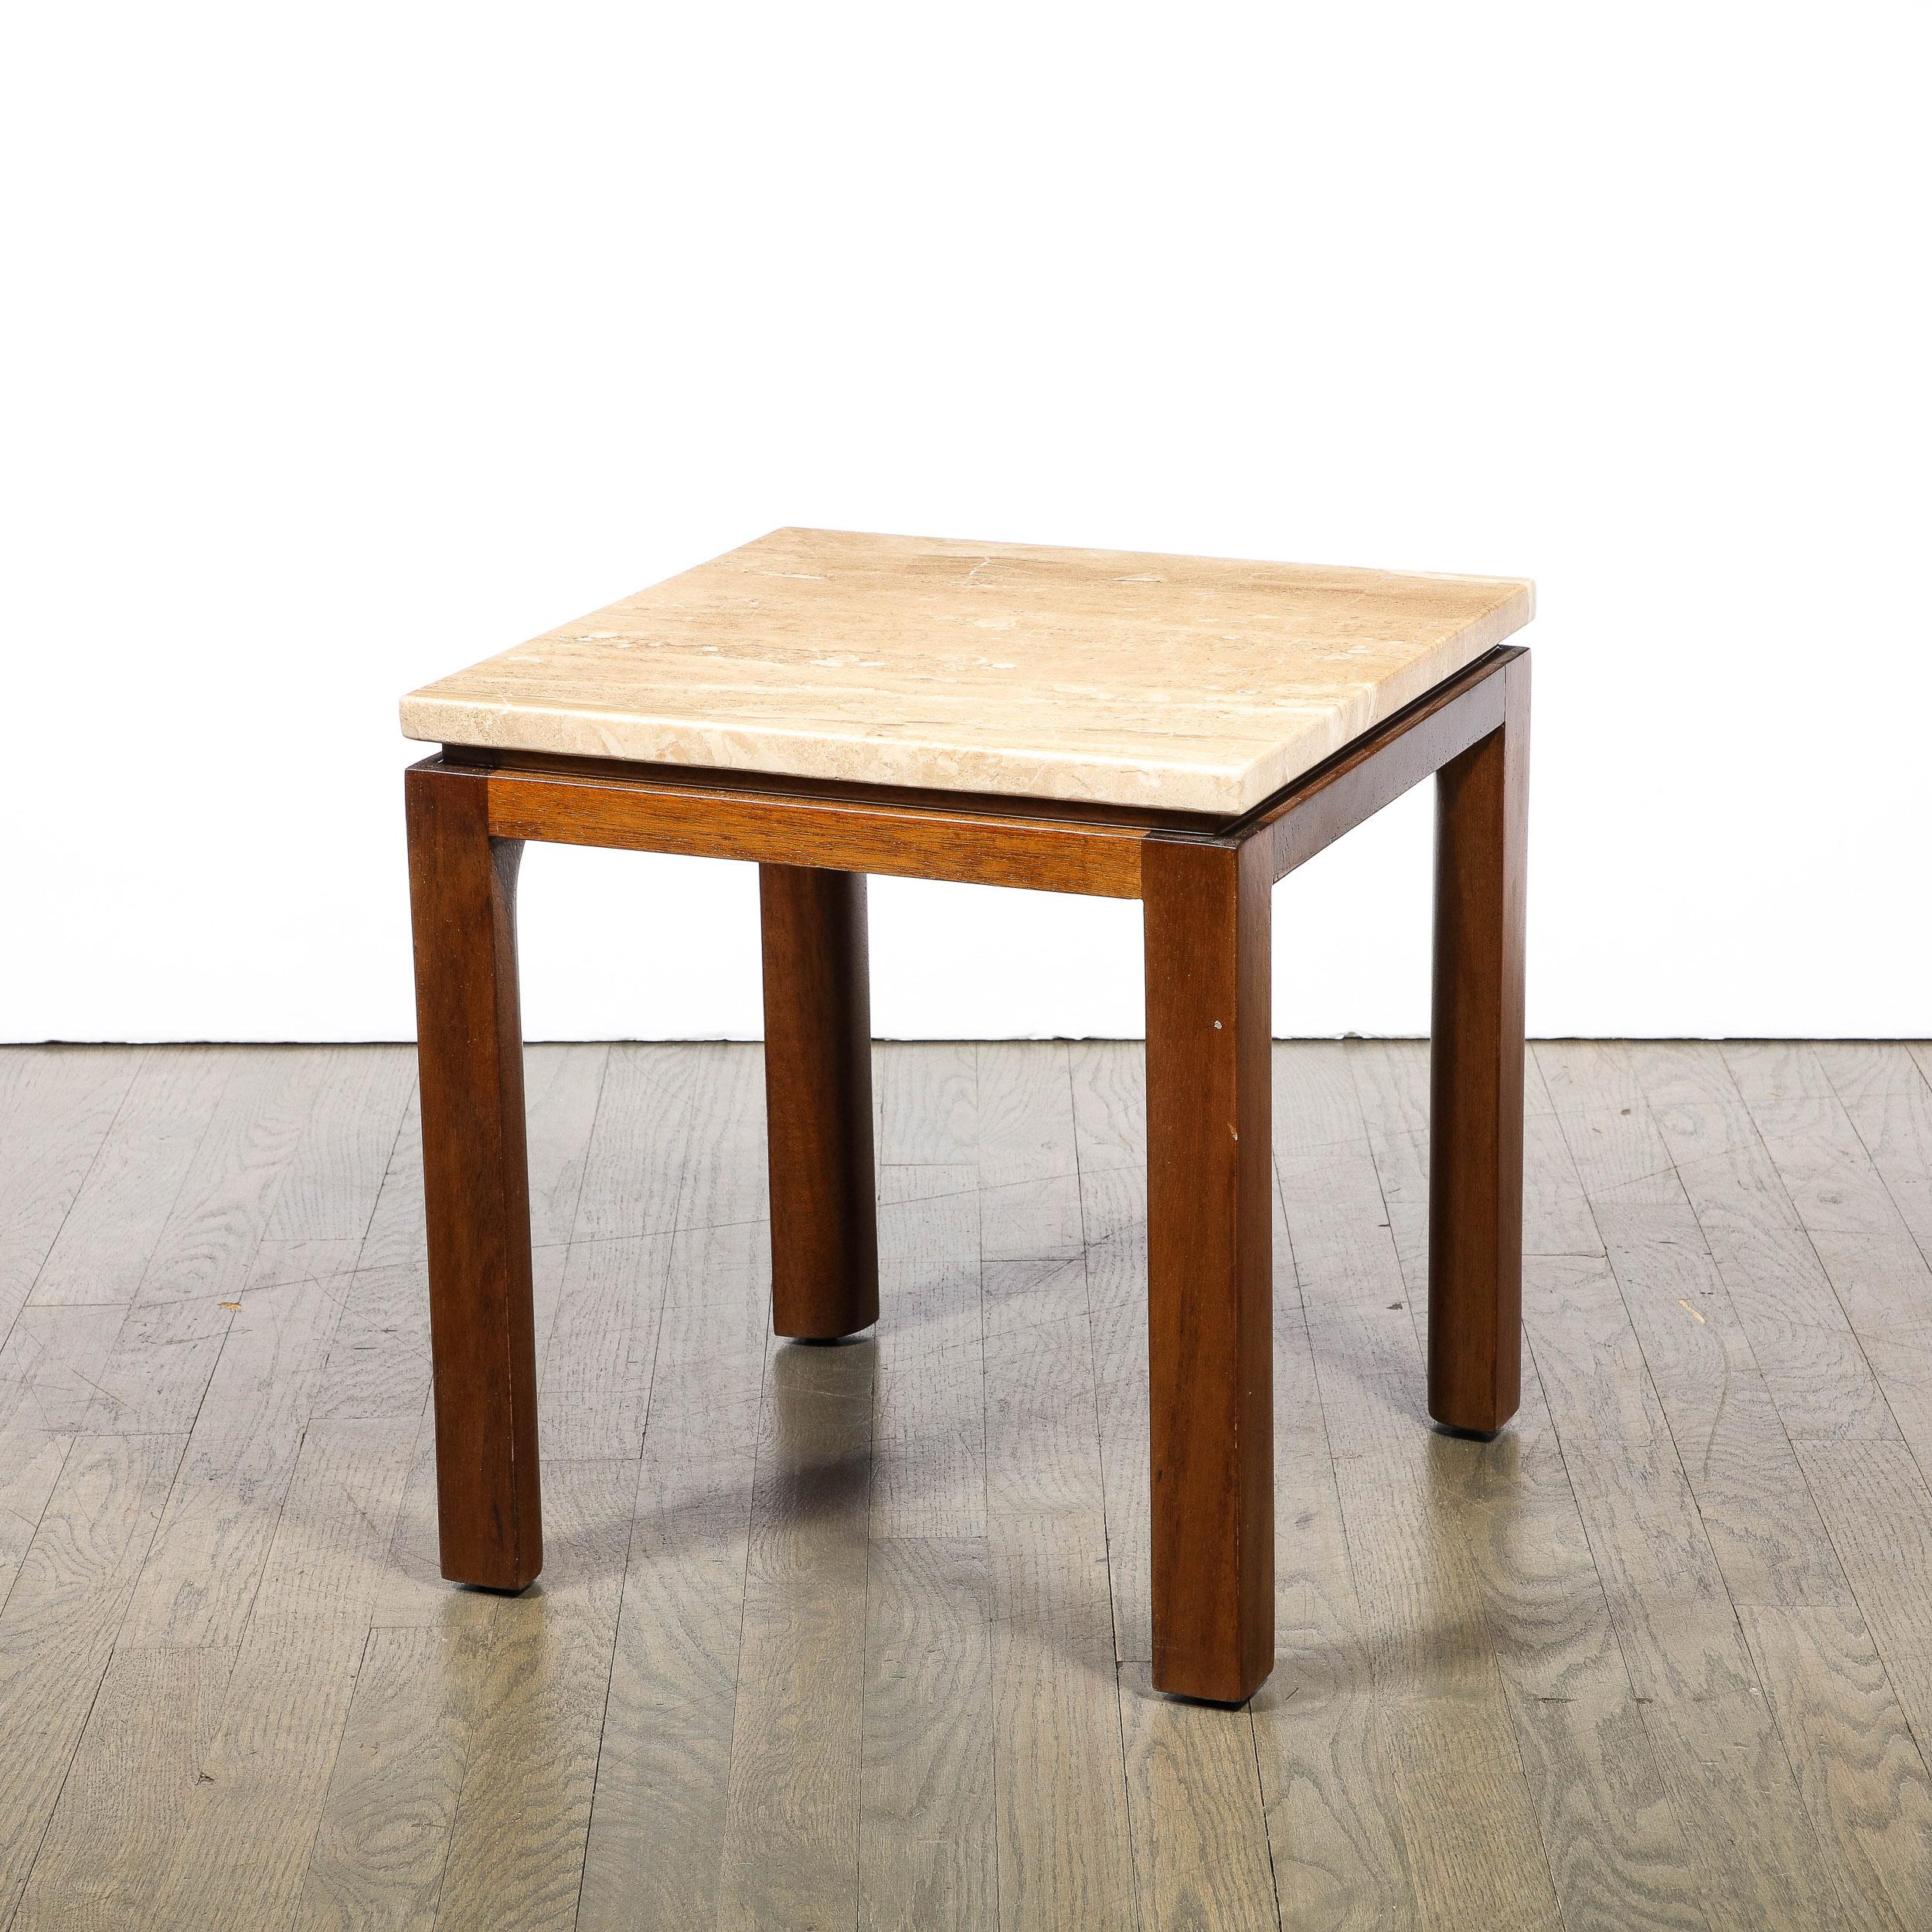 American Mid-Century Modernist Side Table in Walnut & Travertine Marble by Harvey Probber For Sale